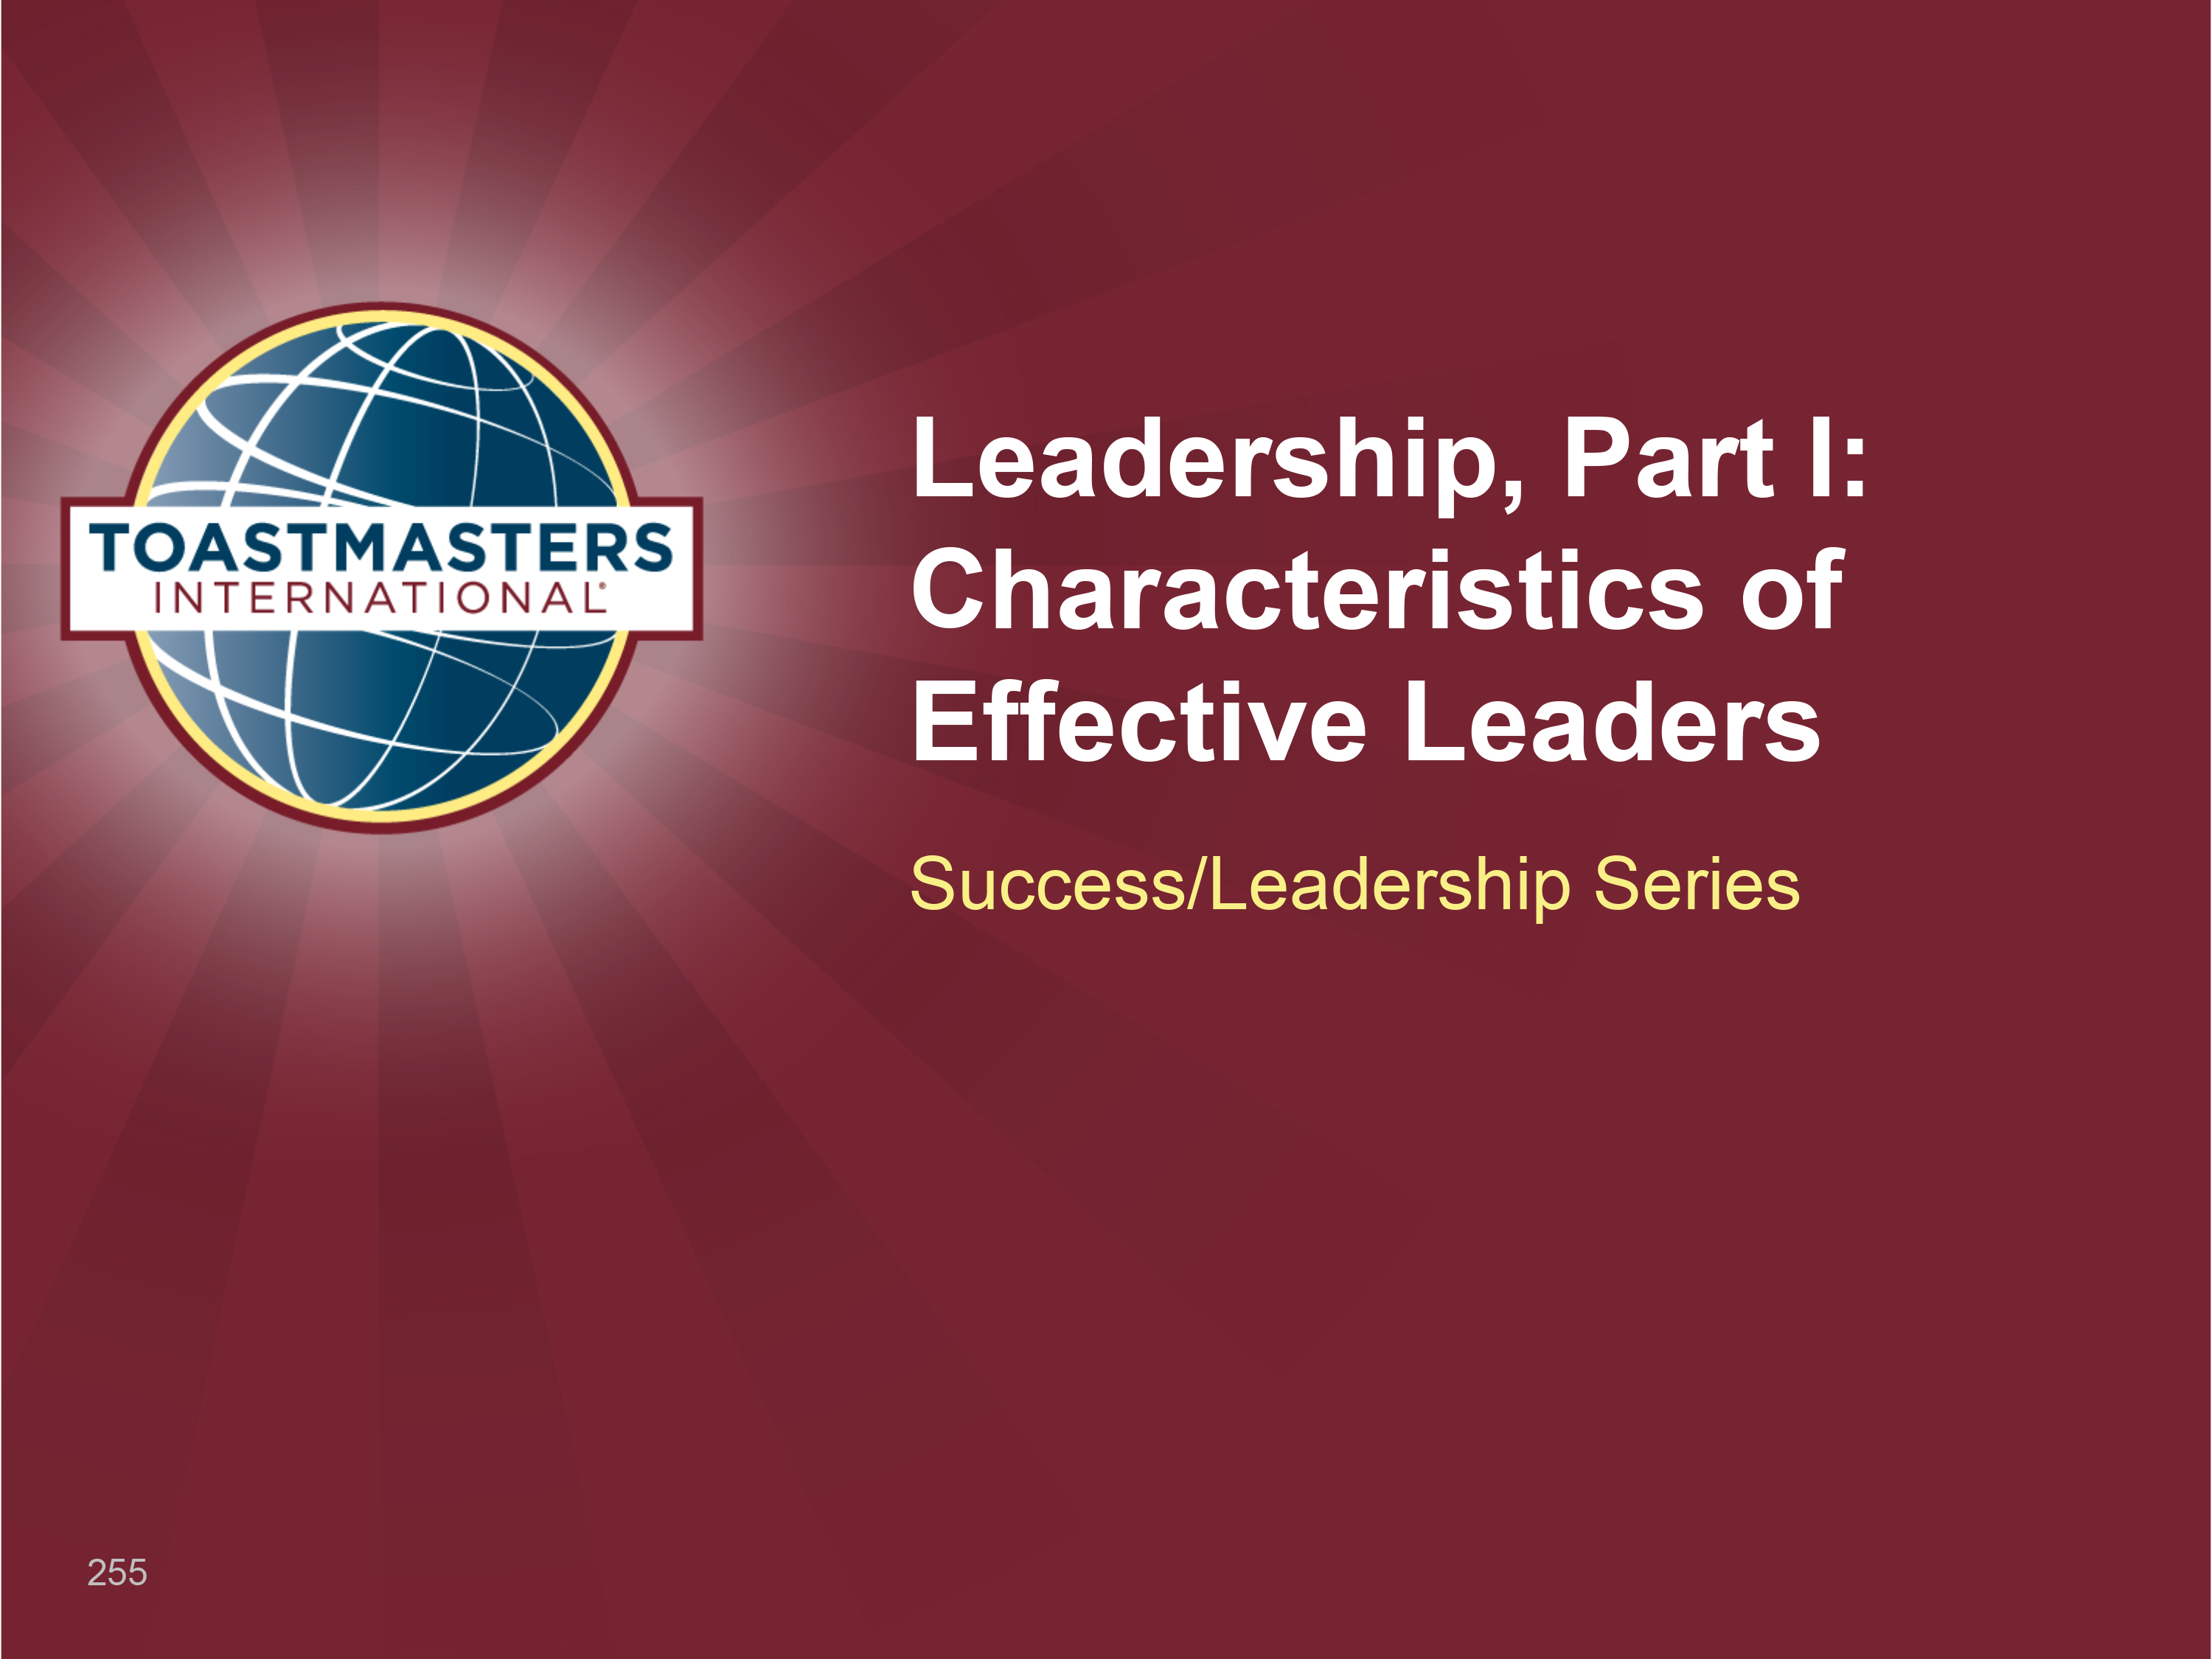 Leadership, Part I: Characteristics of Effective Leaders (PPT)